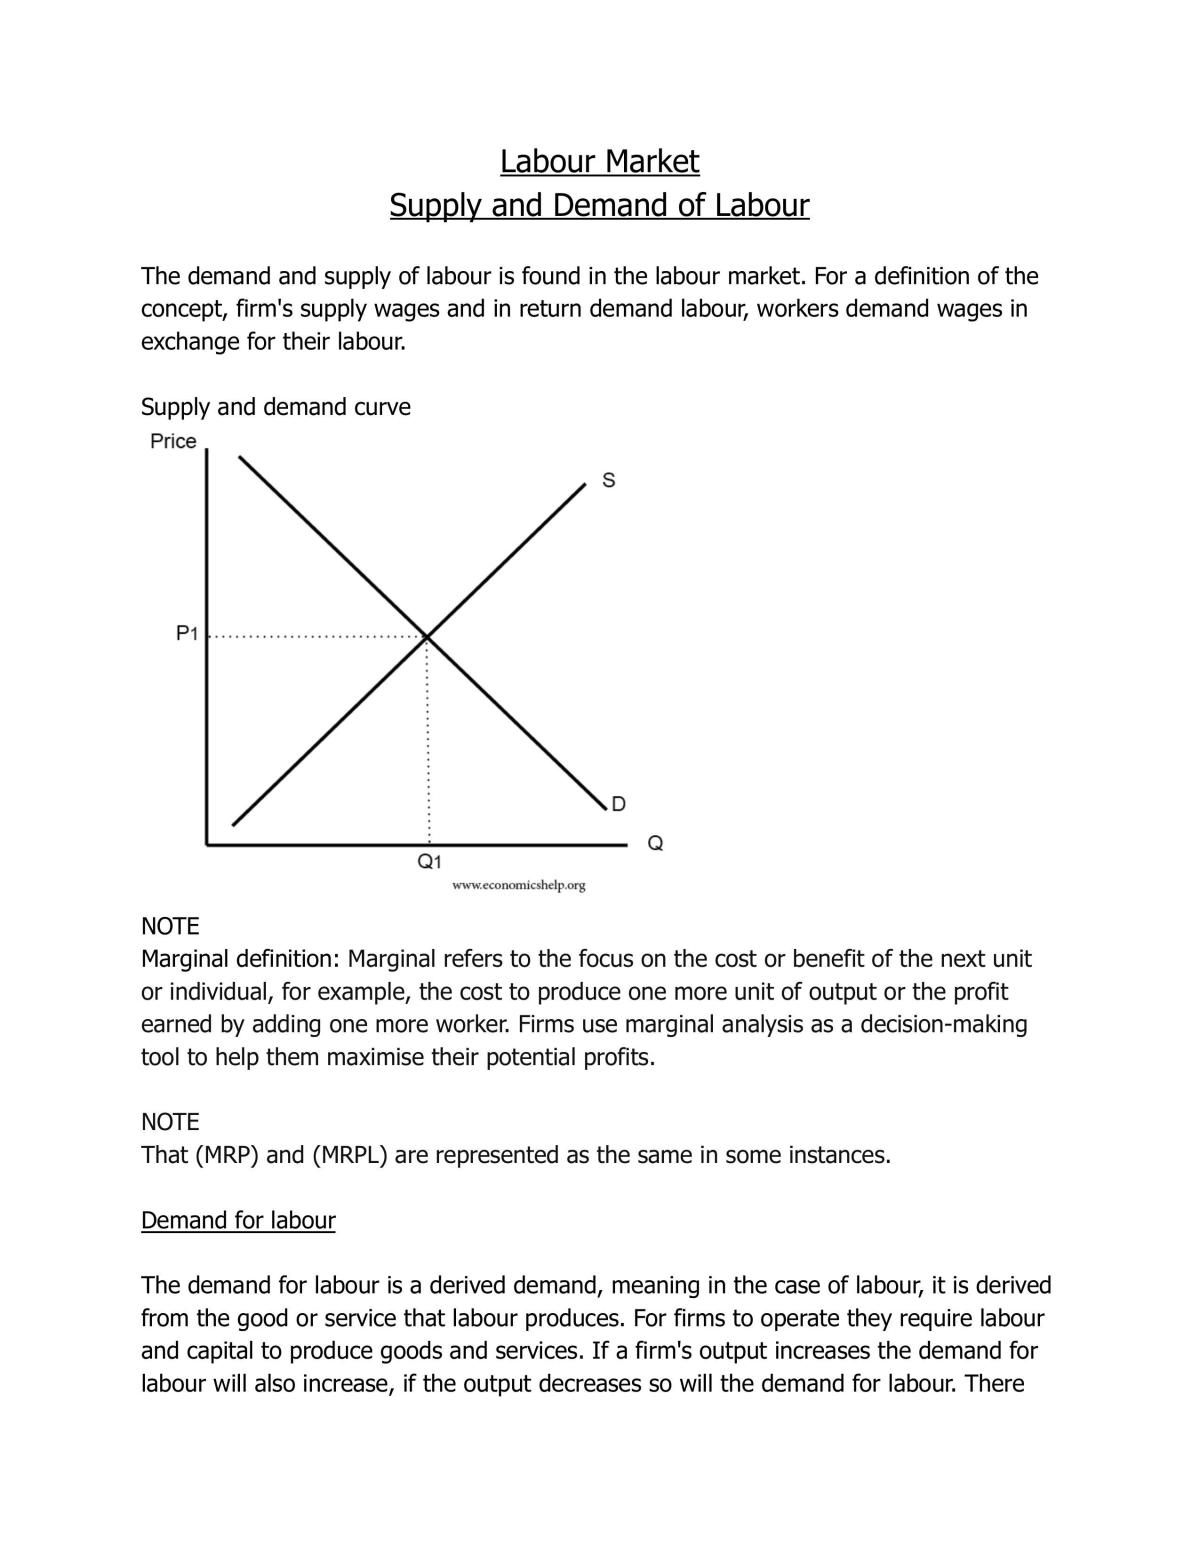 The Labour Market. Supply and Demand of Labour - Page 1